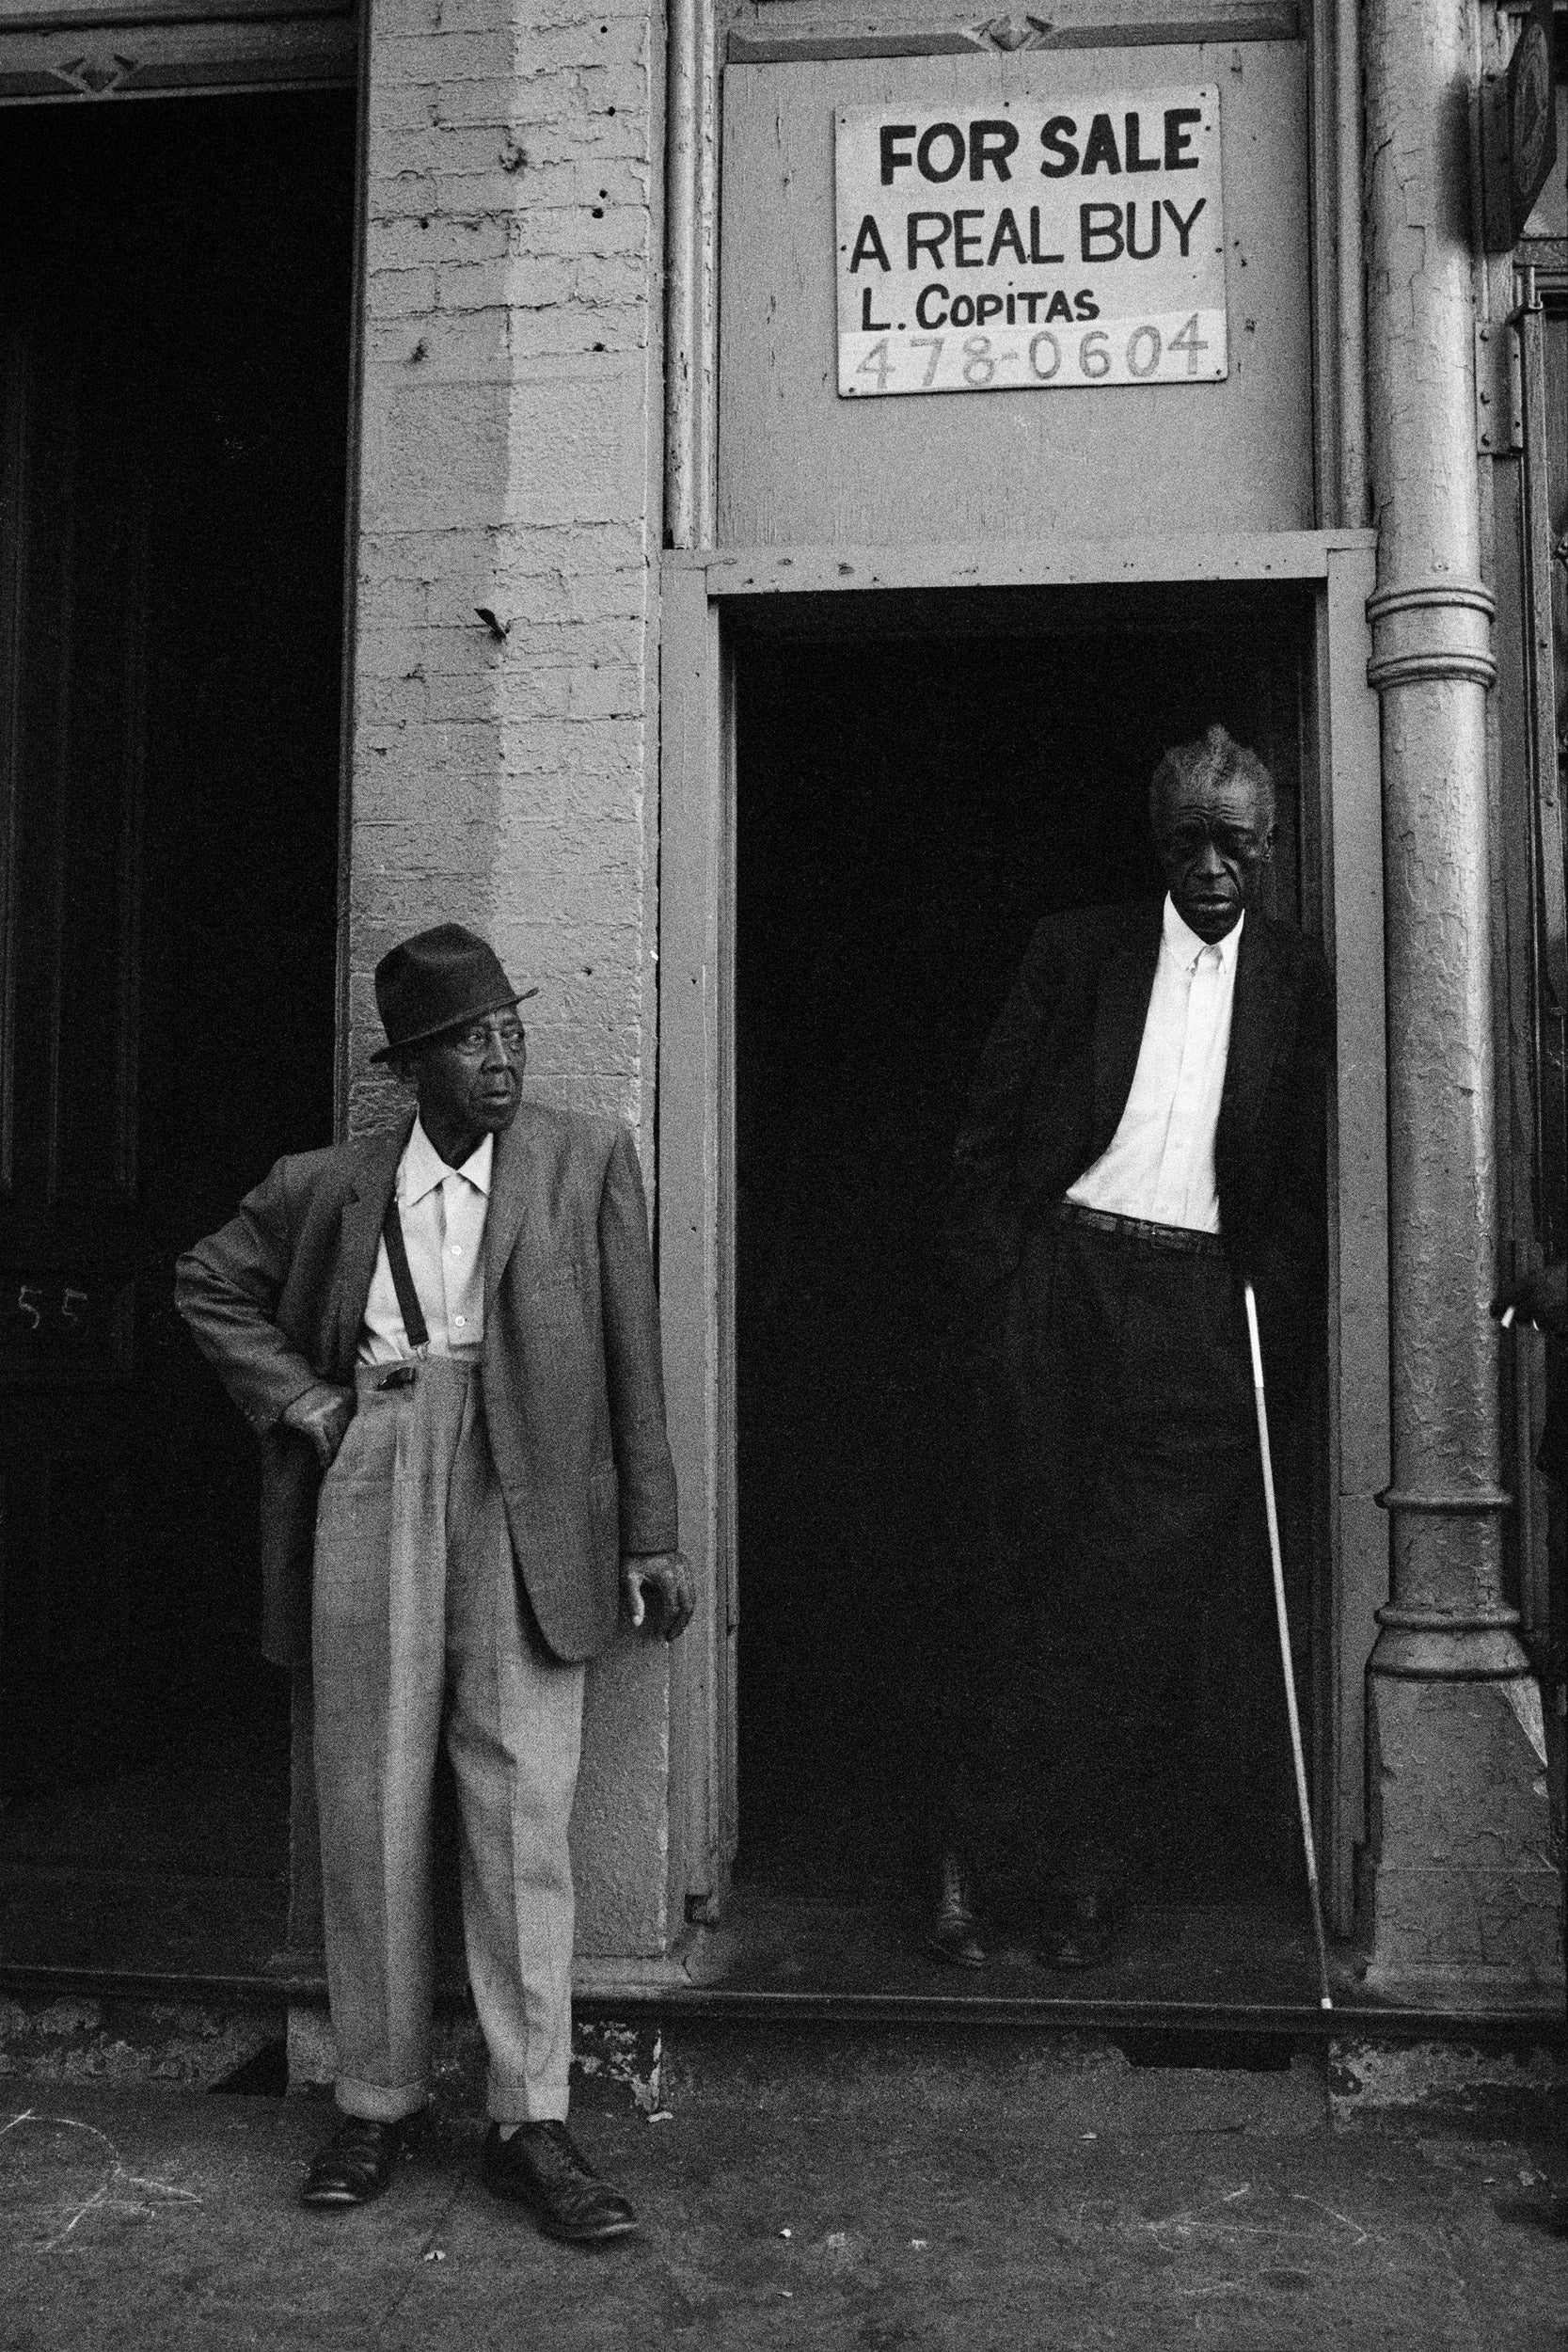 Two men stand in front of building with For Sale sign in Chicago in 1966.